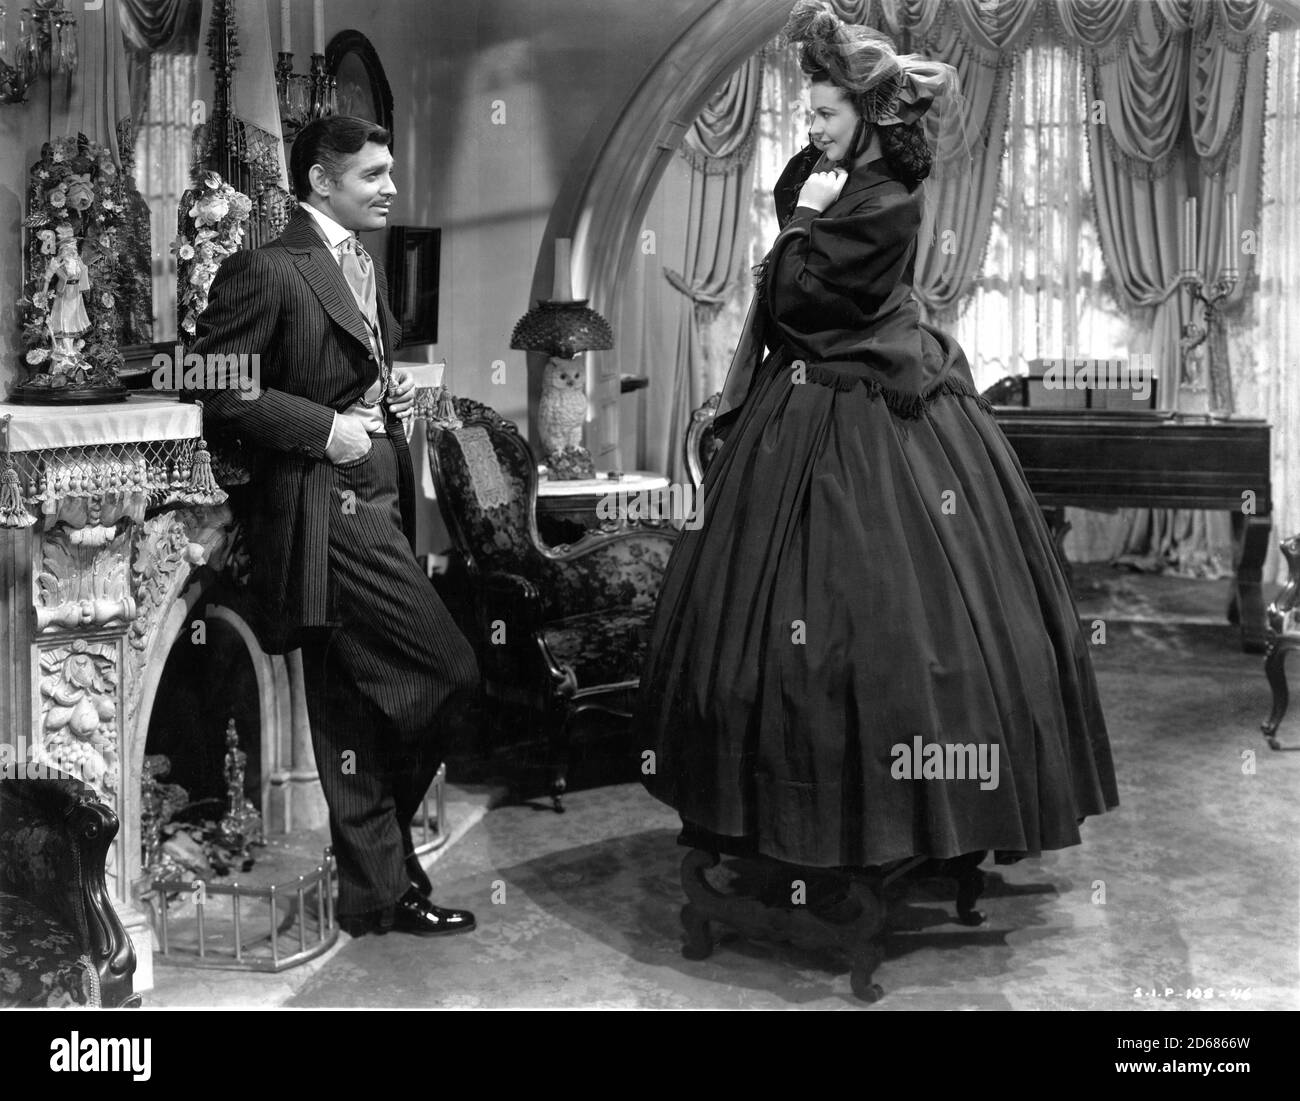 CLARK GABLE and VIVIEN LEIGH in GONE WITH THE WIND 1939 director VICTOR FLEMING novel Margaret Mitchell music Max Steiner costumes Walter Plunkett producer David O. Selznick Selznick International Pictures / Metro Goldwyn Mayer Stock Photo